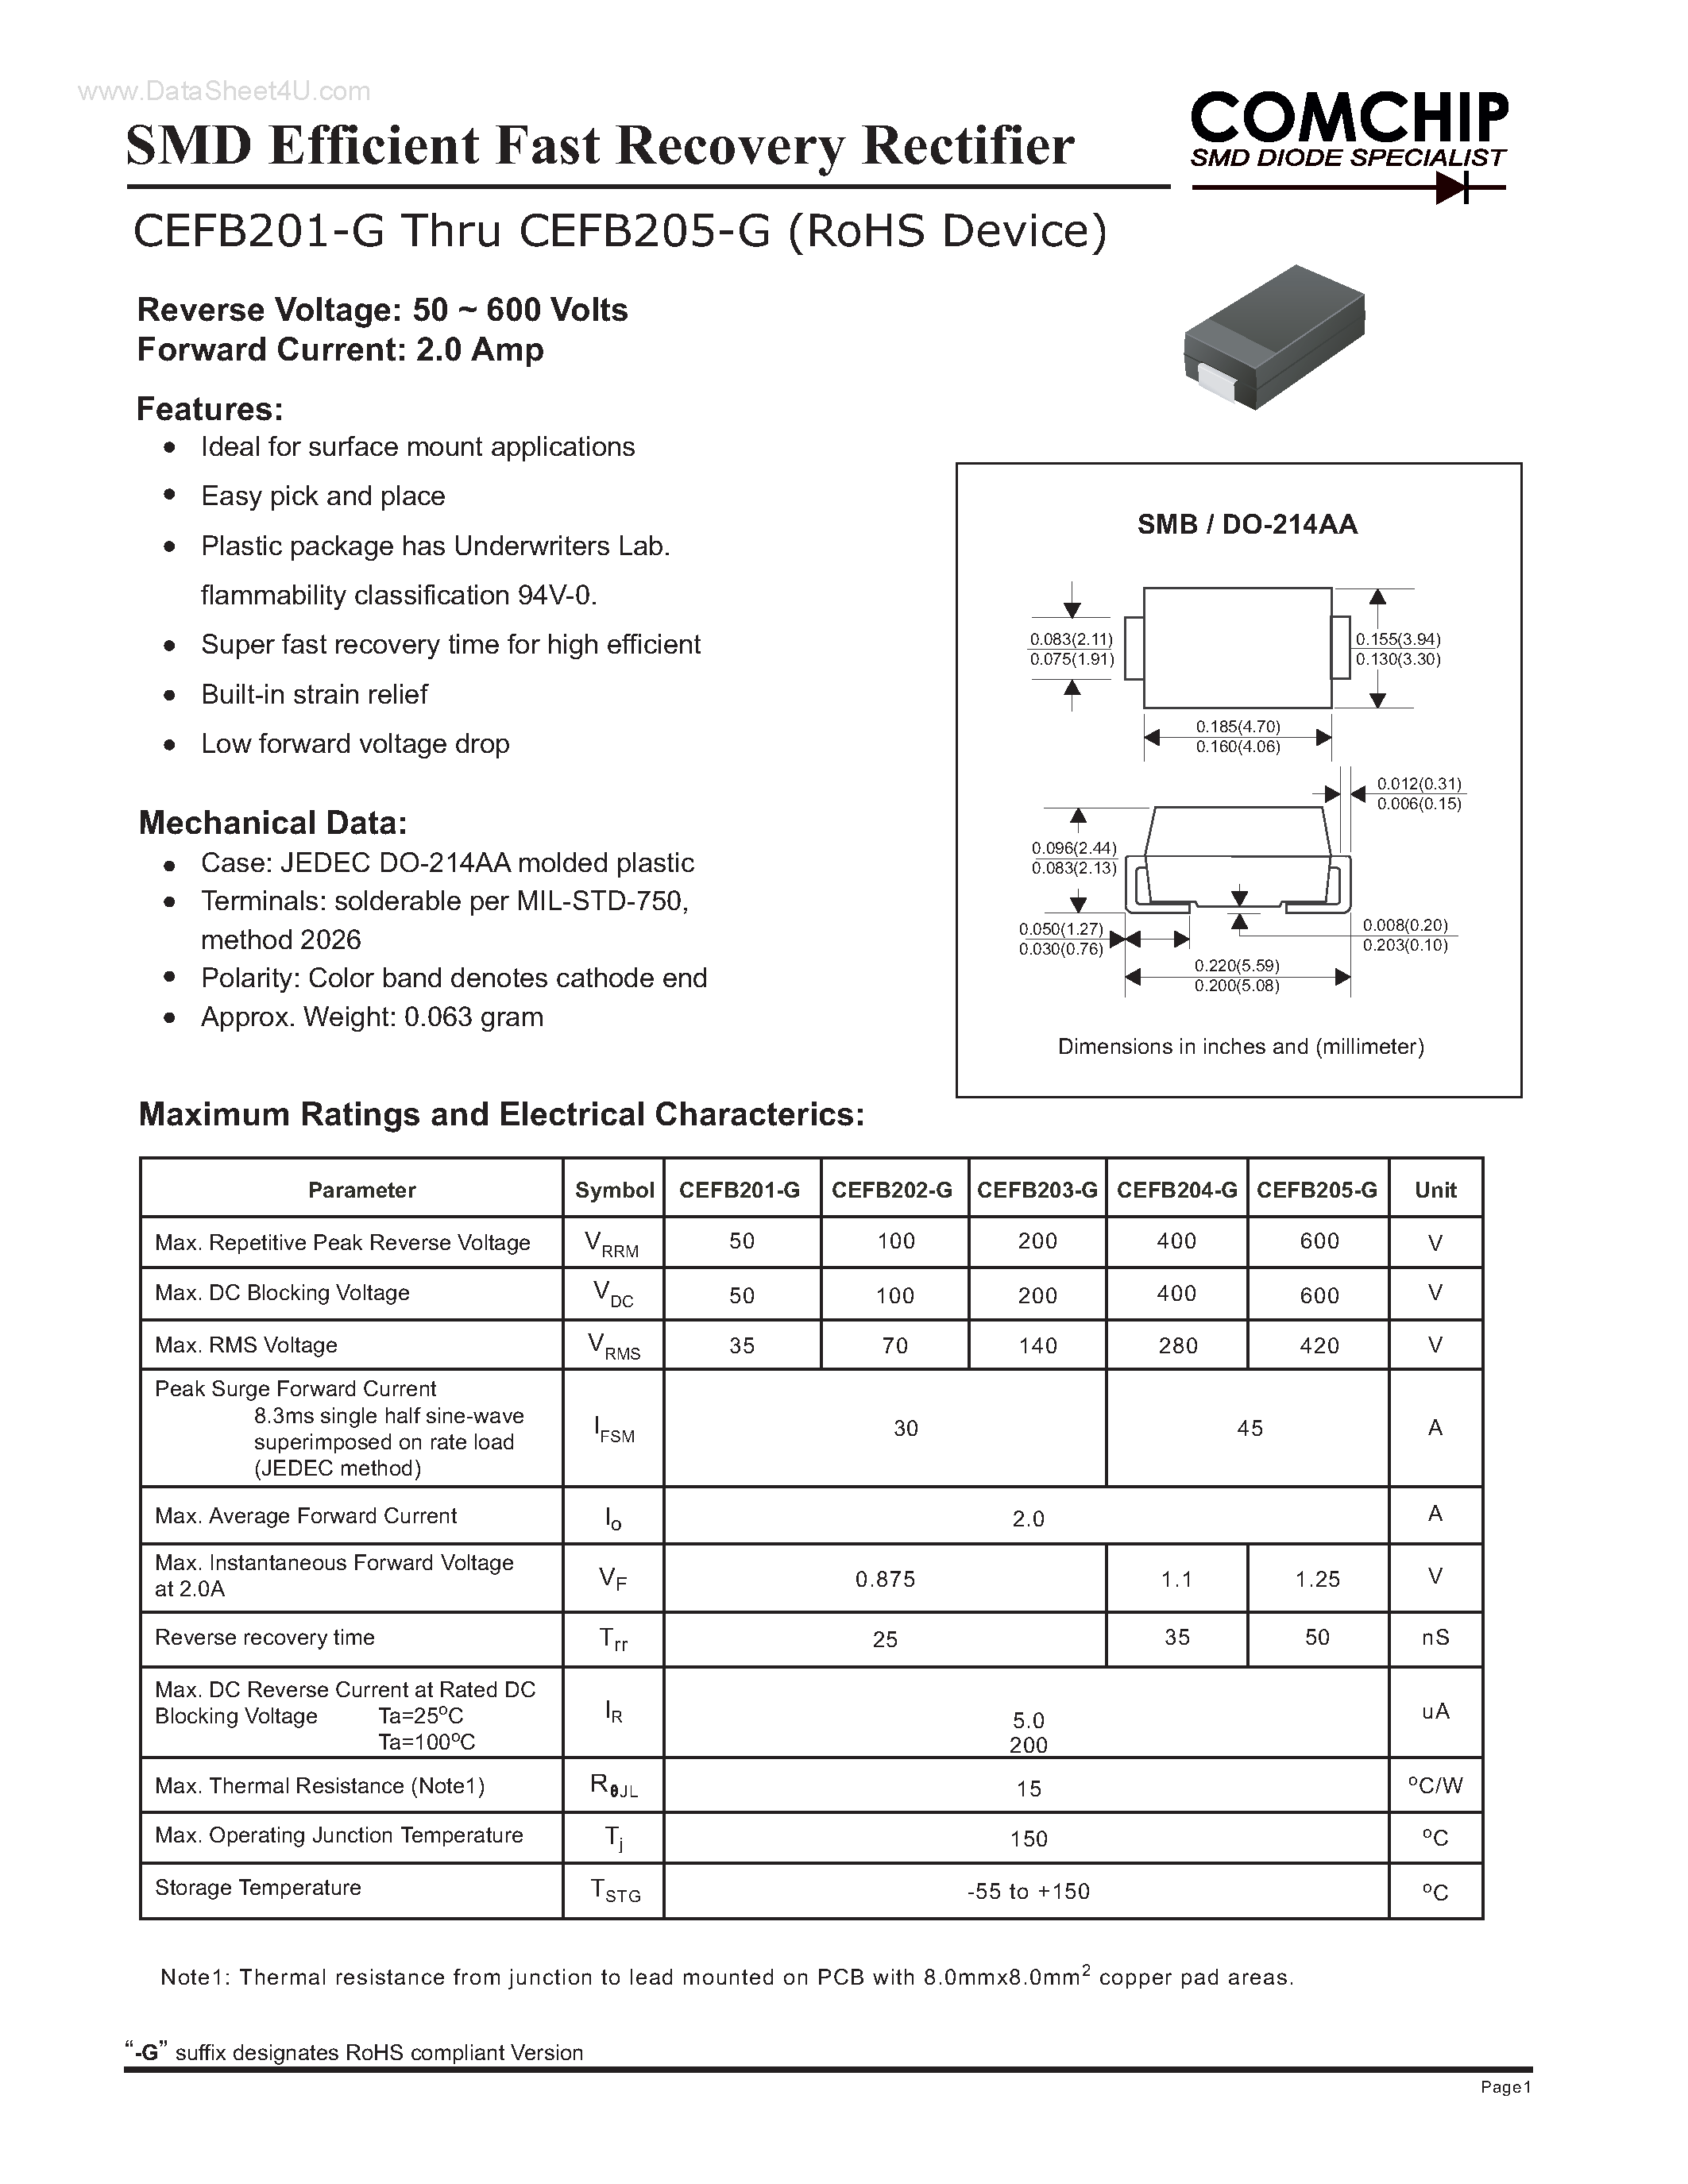 Datasheet CEFB201-G - (CEFB201-G - CEFB205-G) SMD Efficient Fast Recovery Rectifier page 1